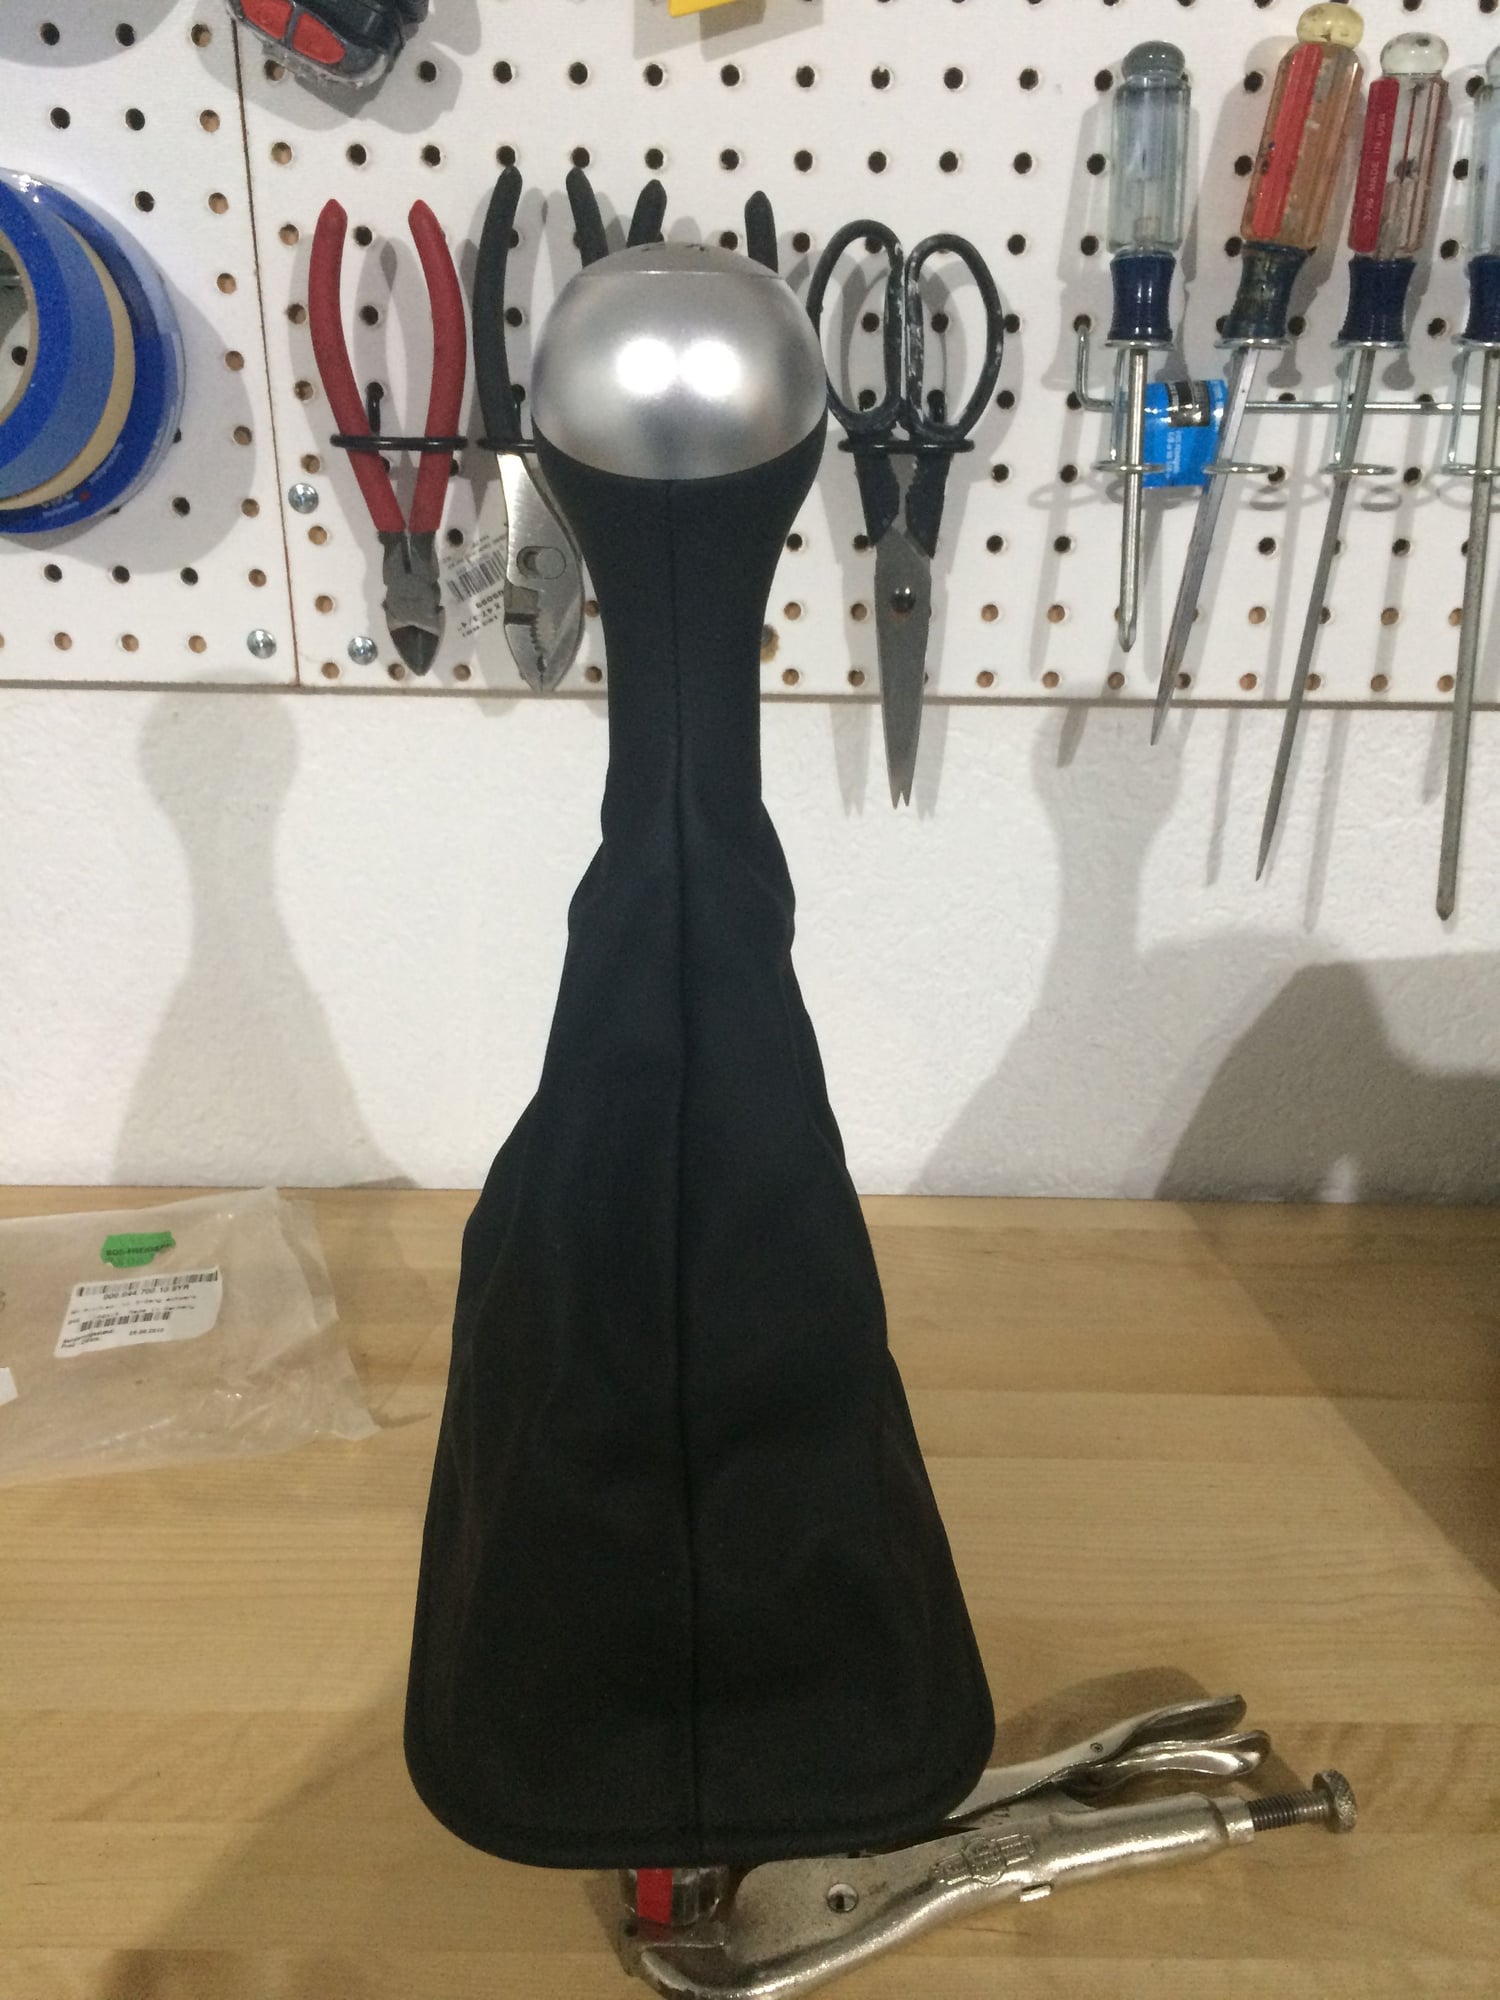 Interior/Upholstery - Aluminum / Leather Tequipment weighted shift knob - Used - Mill Creek, WA 98012, United States